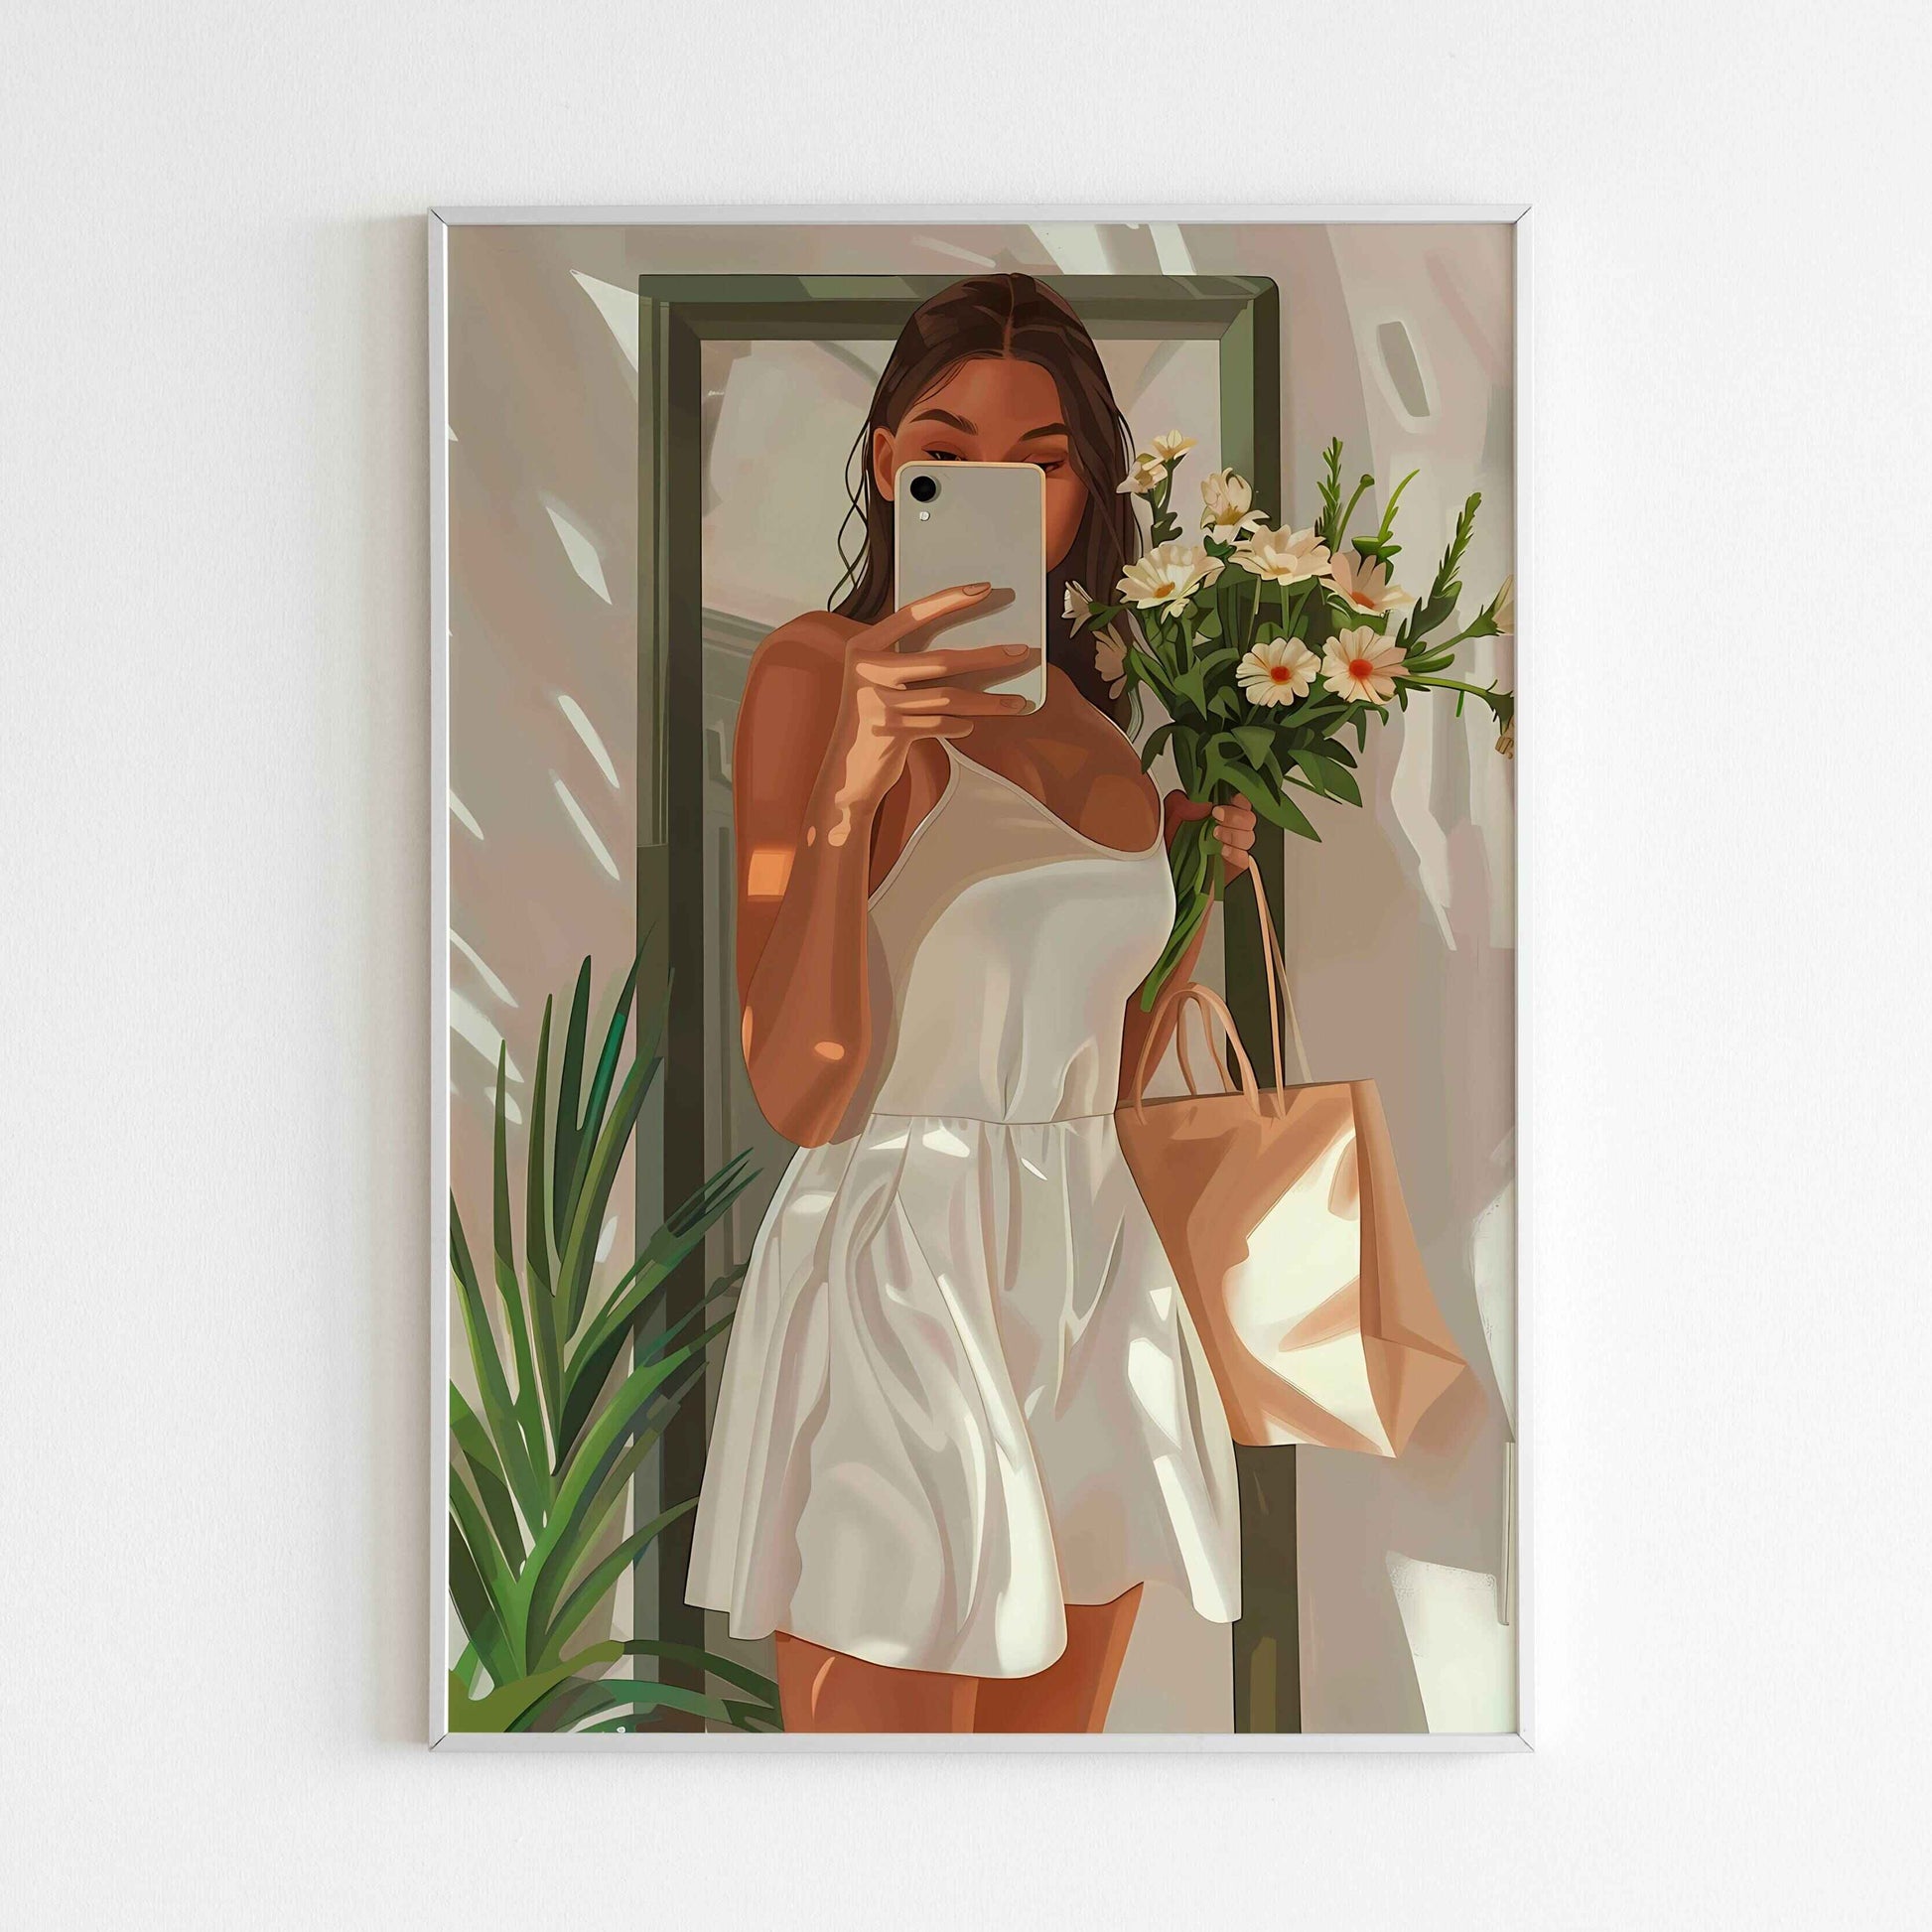 Complete your series of self-expression with a Mirror Selfie(5 of 5) printable poster (physical or digital).